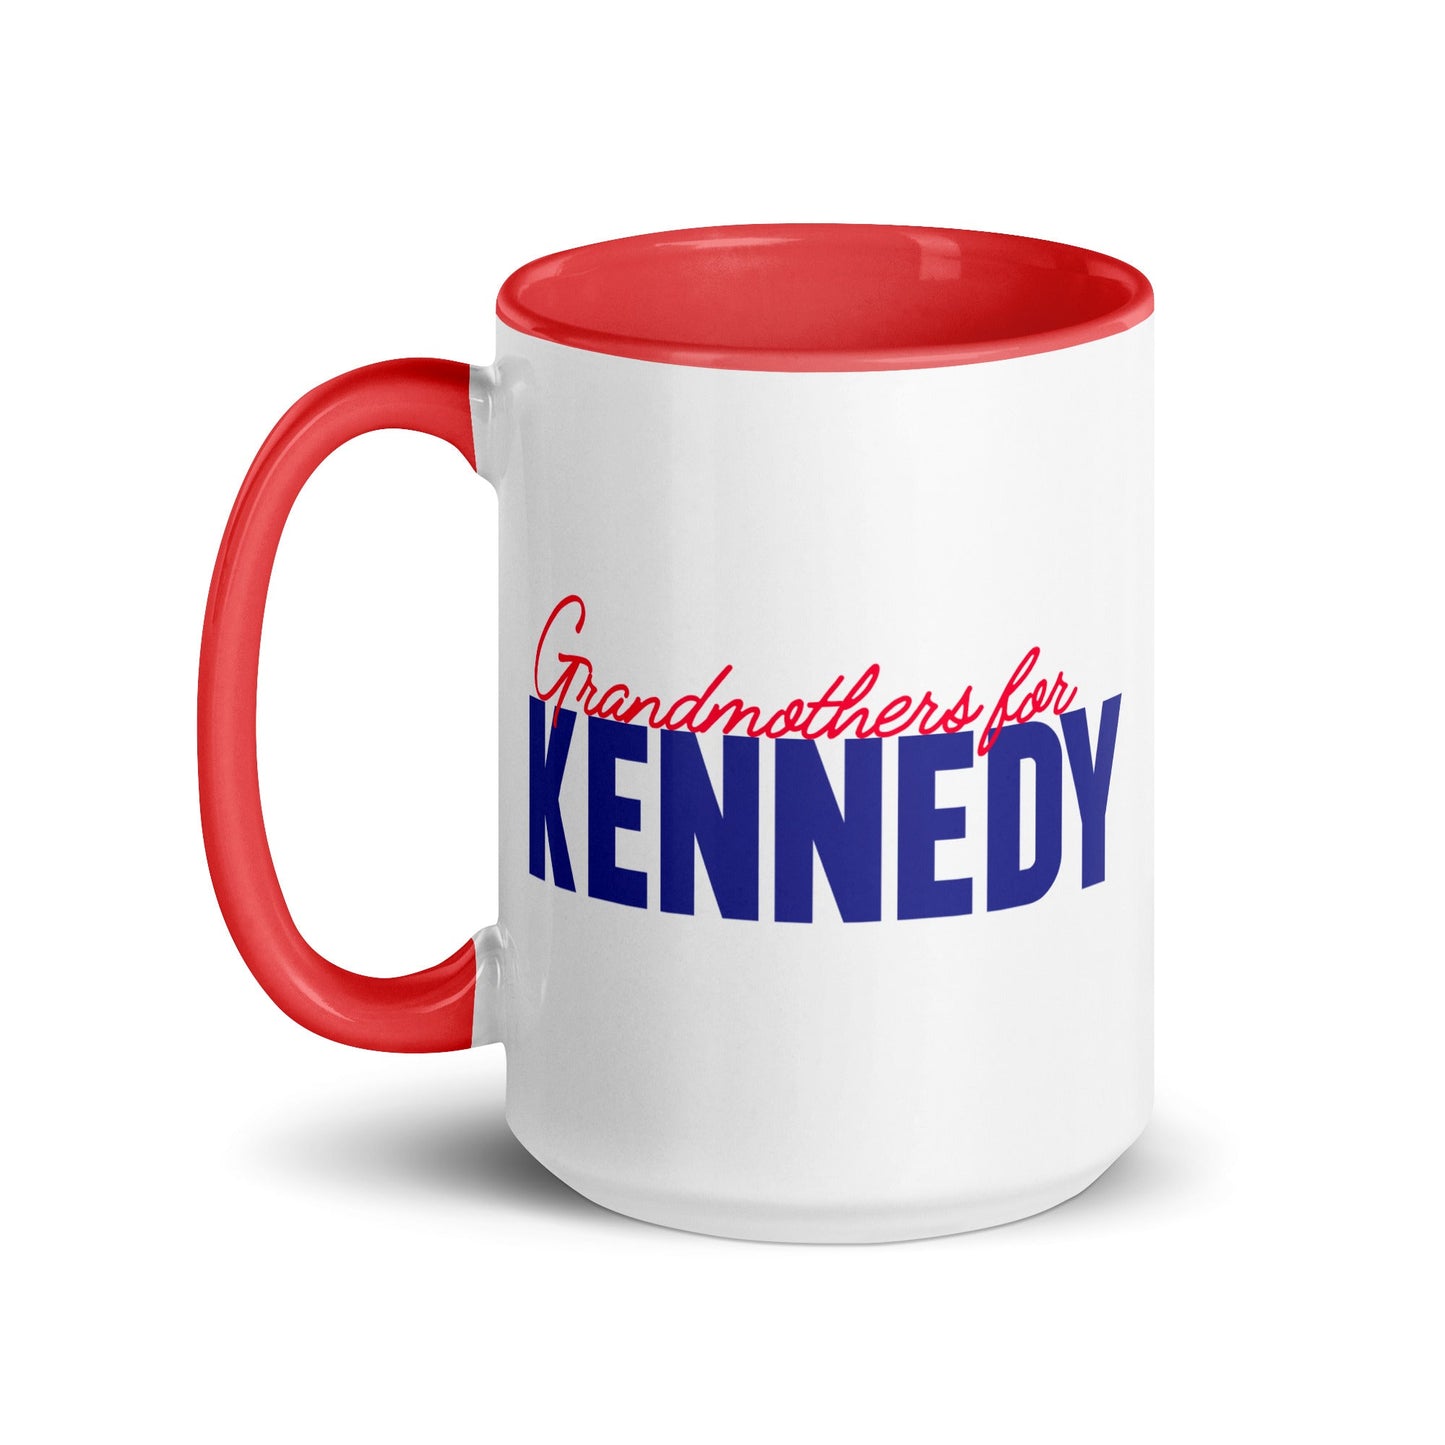 Grandmothers for Kennedy Mug - TEAM KENNEDY. All rights reserved